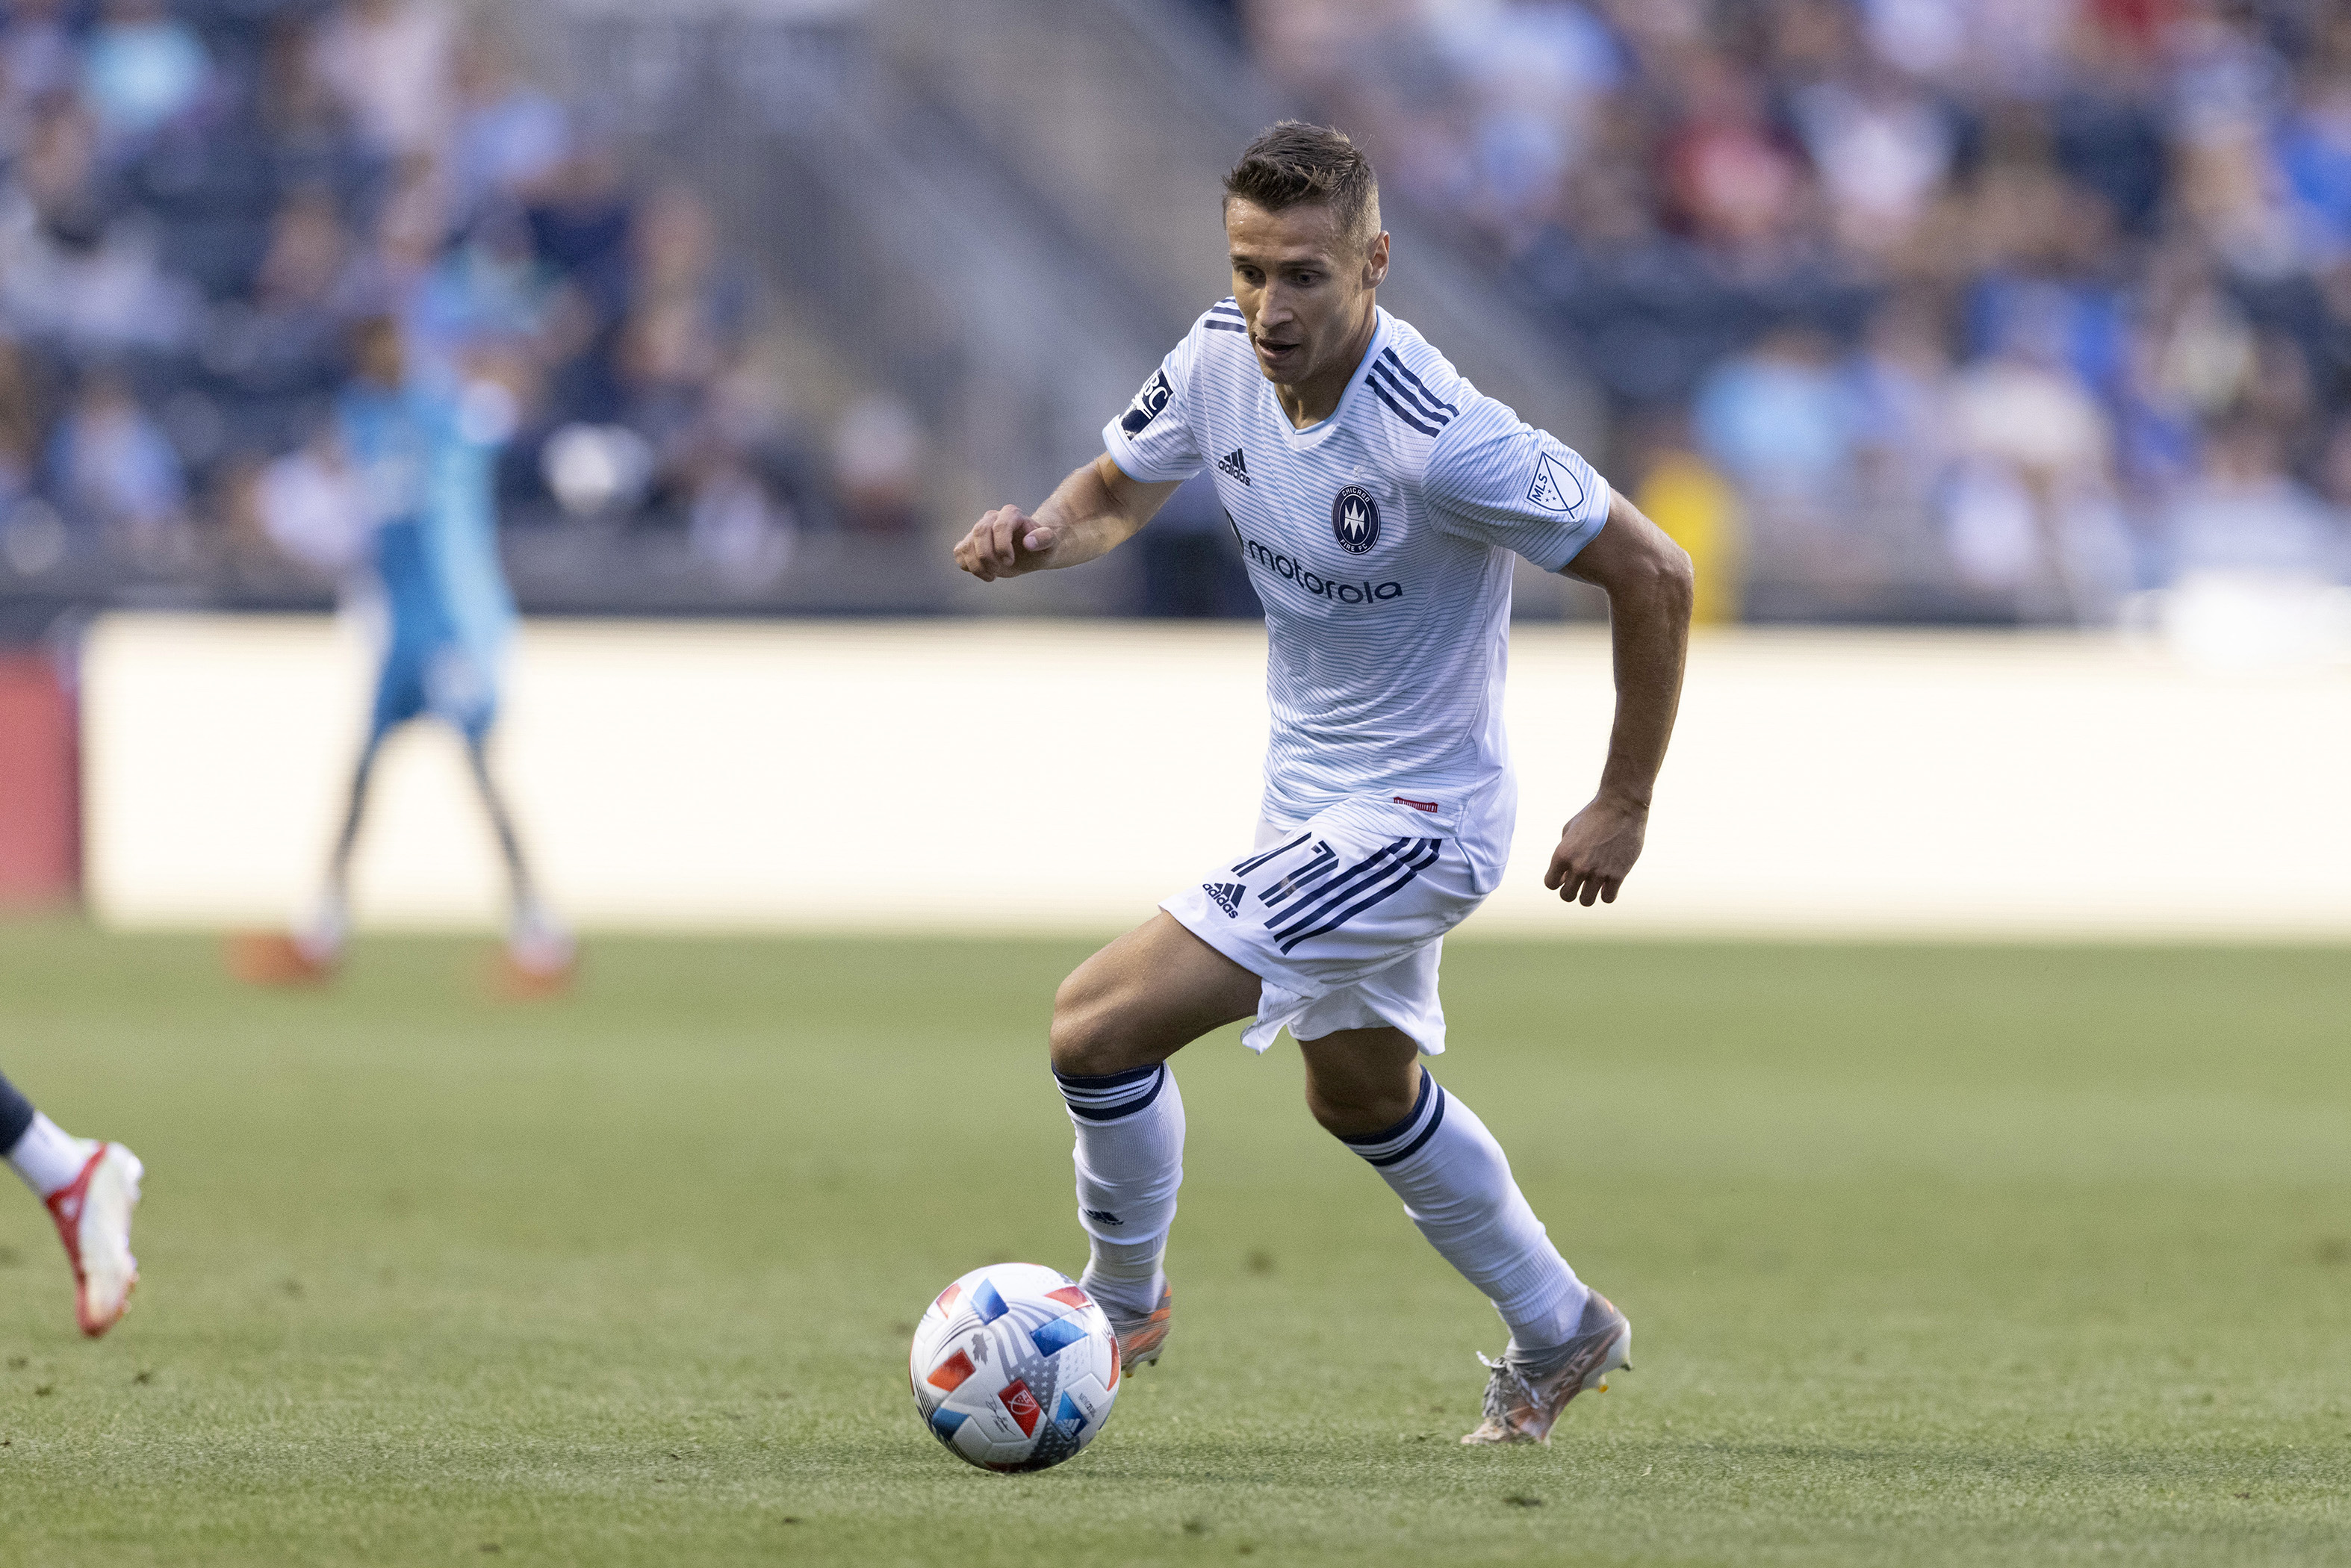 Chicago Fire vs New York City FC Prediction, 8/4/2021 MLS Soccer Pick, Tips and Odds